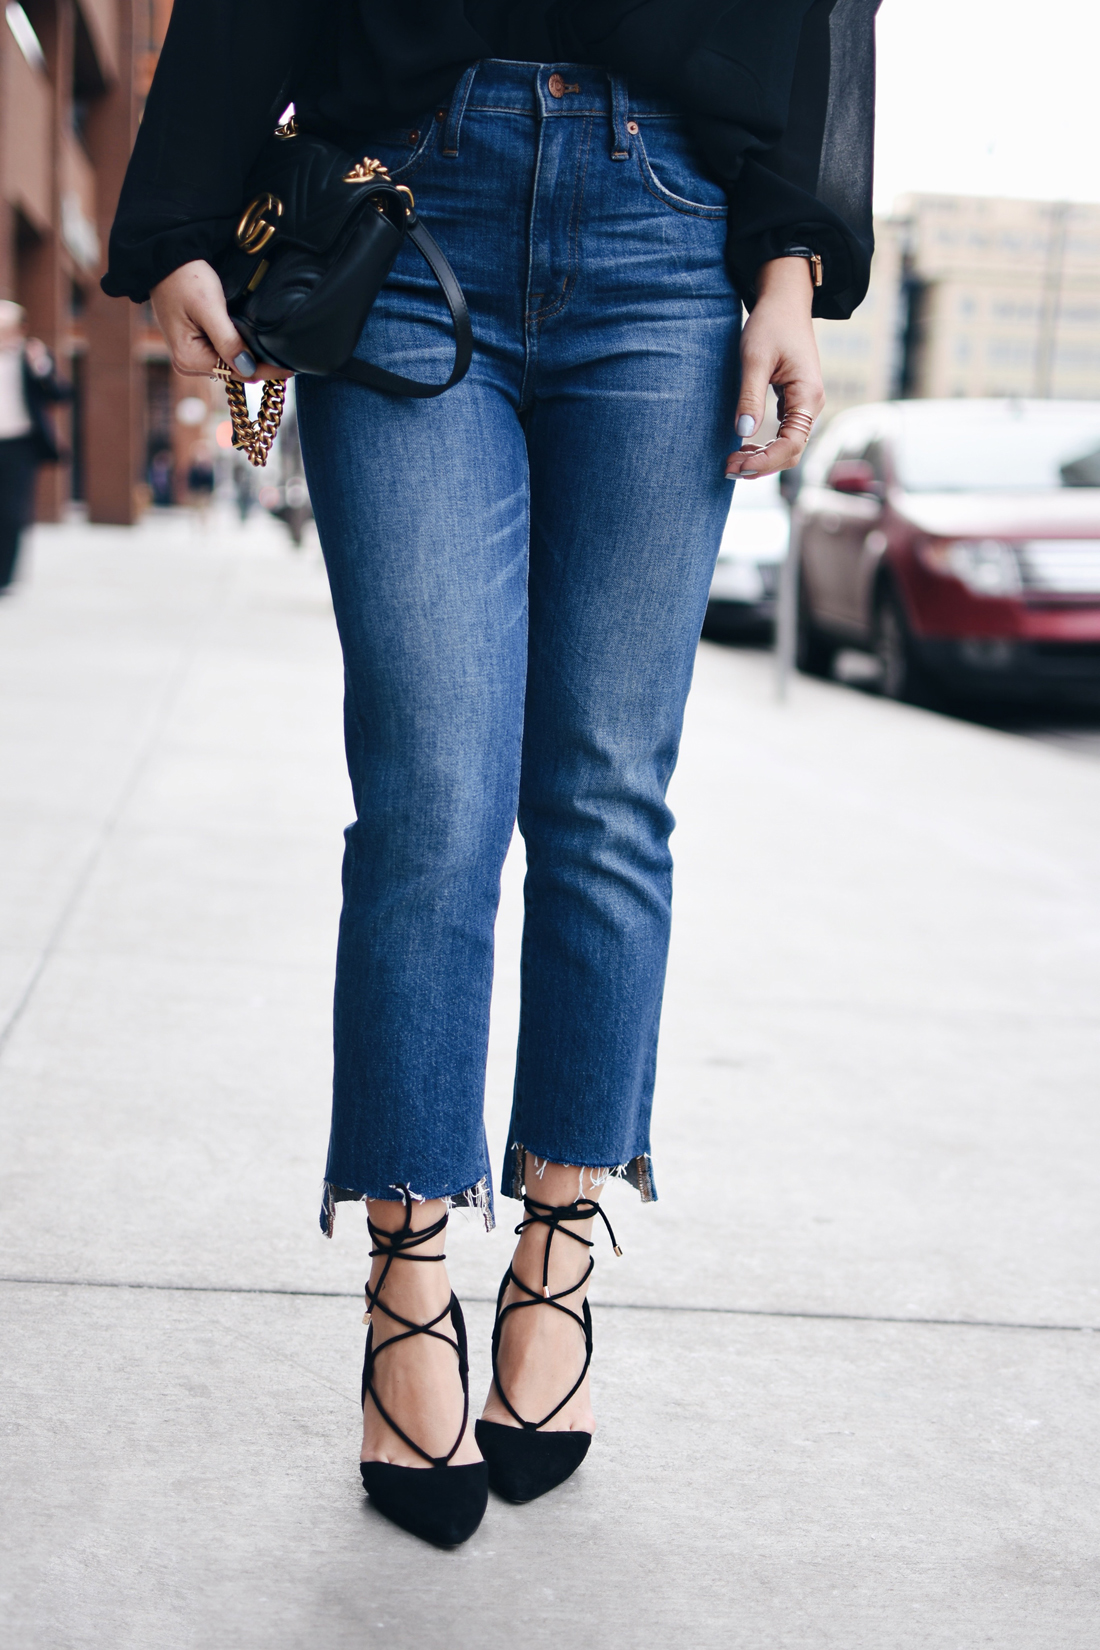 Madewell raw hem jeans and Aldo lace up pumps